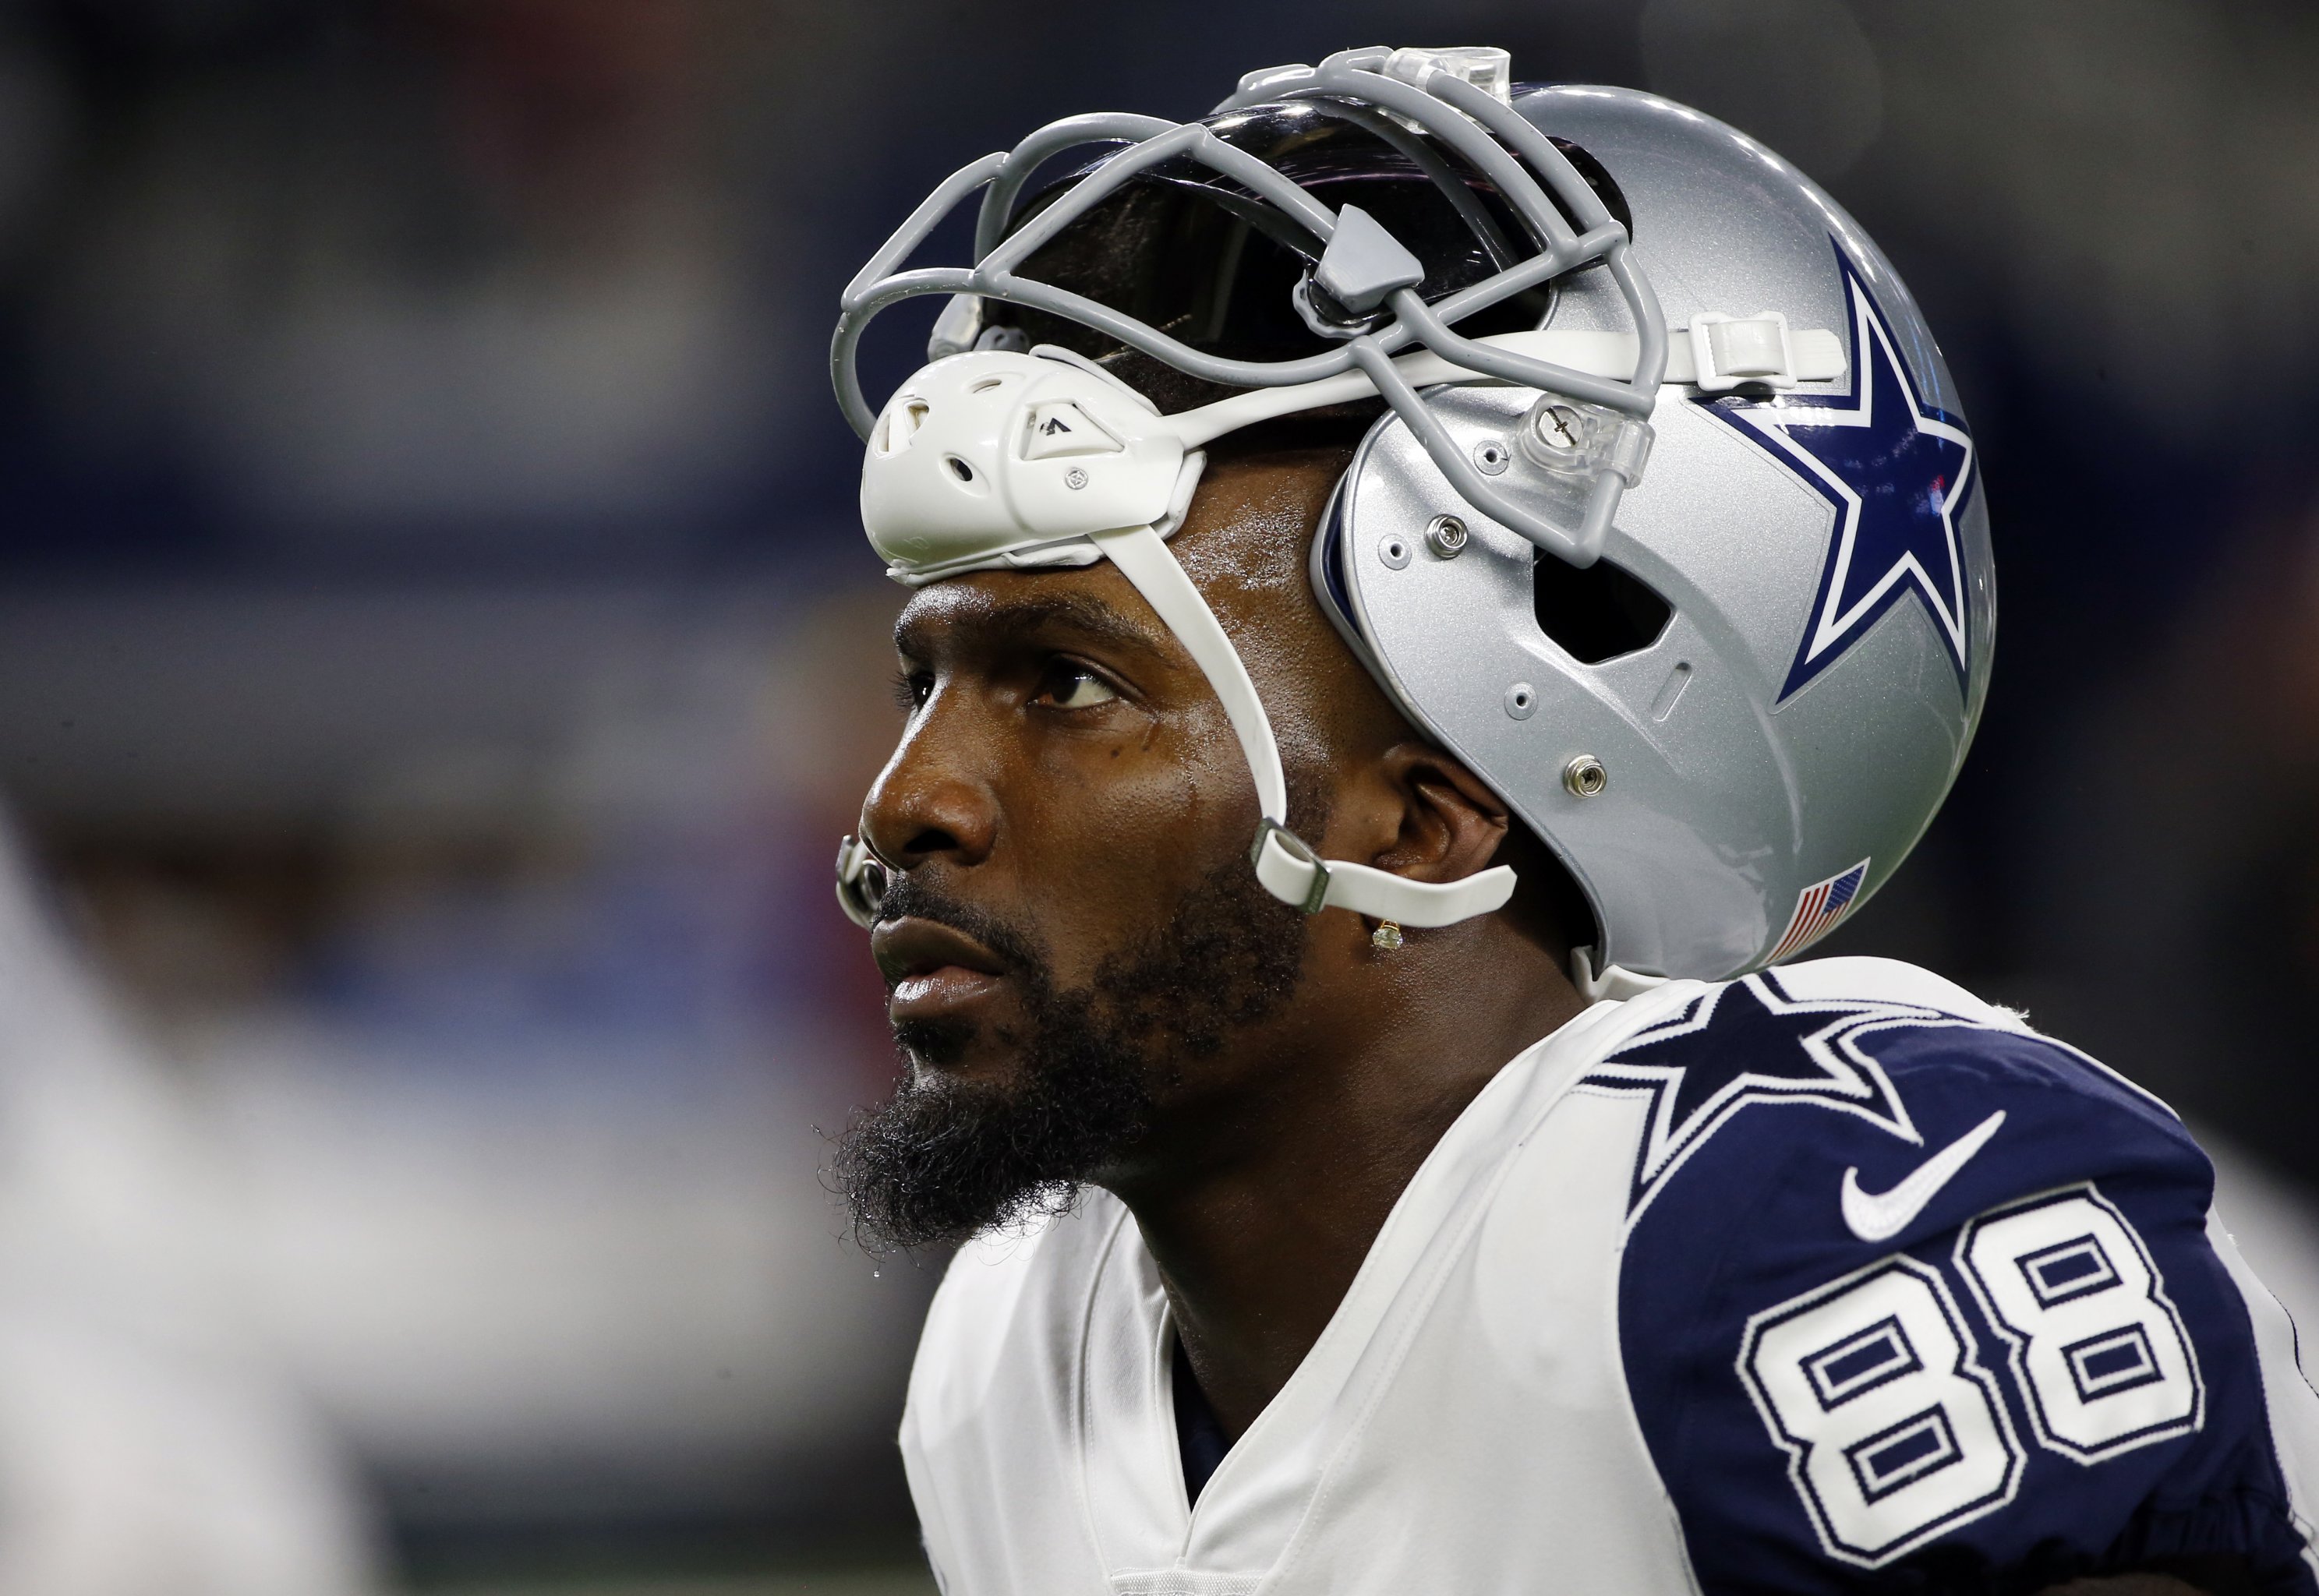 Walker: Saints signing Dez Bryant is a risk worth taking to reach